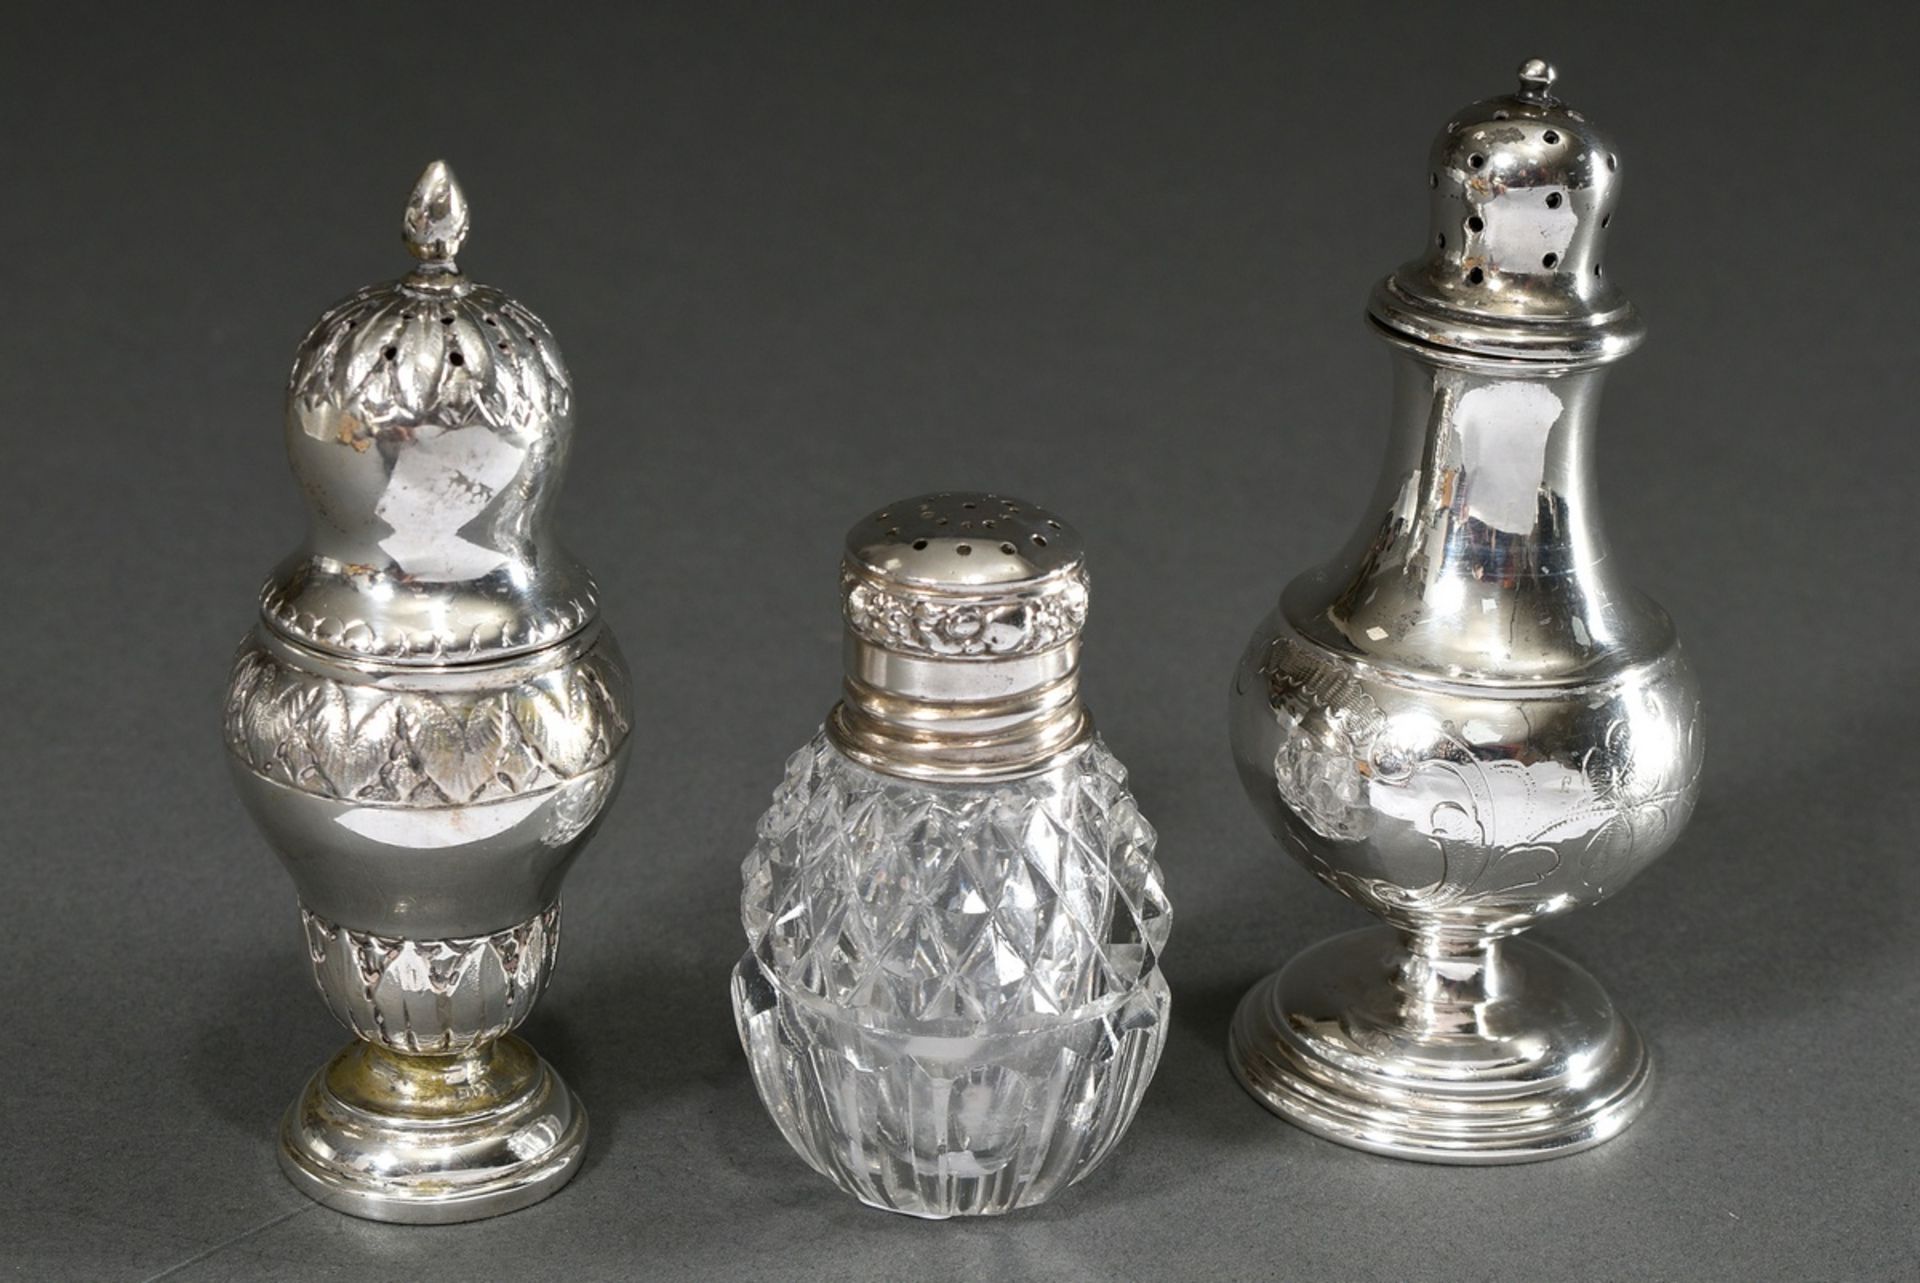 3 Various salt cellars in different shapes: 1x baluster-shaped with floral engraving, 1x vase-shape